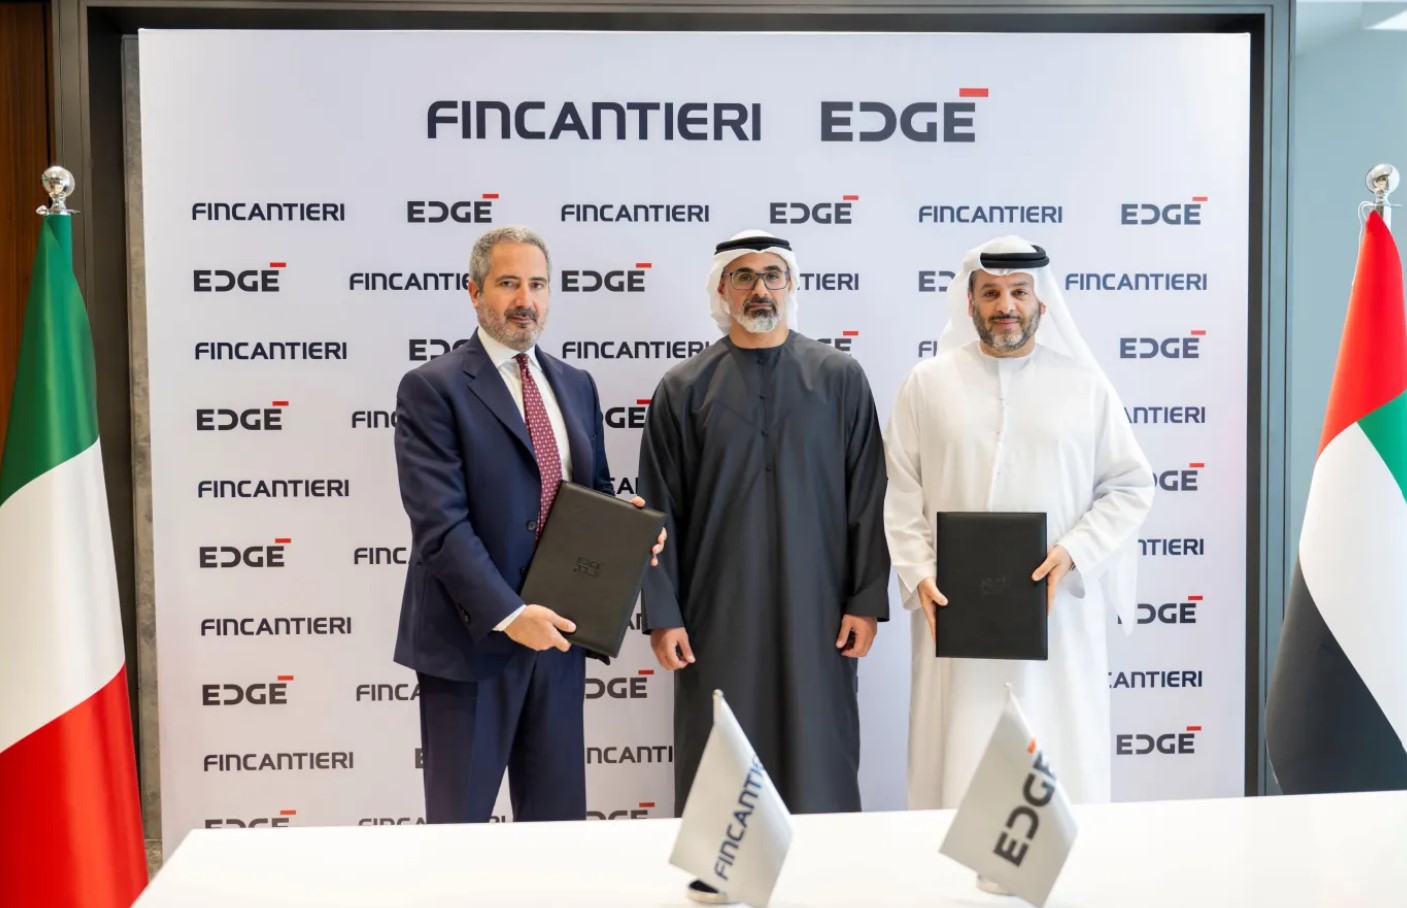 Fincantieri CEO and Managing Director Pierroberto Folgiero, Abu Dhabi crown prince Khaled bin Mohamed Al Nahyan, and EDGE Group chairman Faisal Al Bannai stand to take a photo op during a signing ceremony. Folgiero and Al Bannai hold leather dosiers, which may be holding the signed documents. Italy's flag is seen displayed on the left, and UAE's is on the right. On a white table in front of them, two flags printed with Fincantieri and EDGE's logos are also propped up. Behind them is a white screen with the companies' logos printed in a repeating pattern.